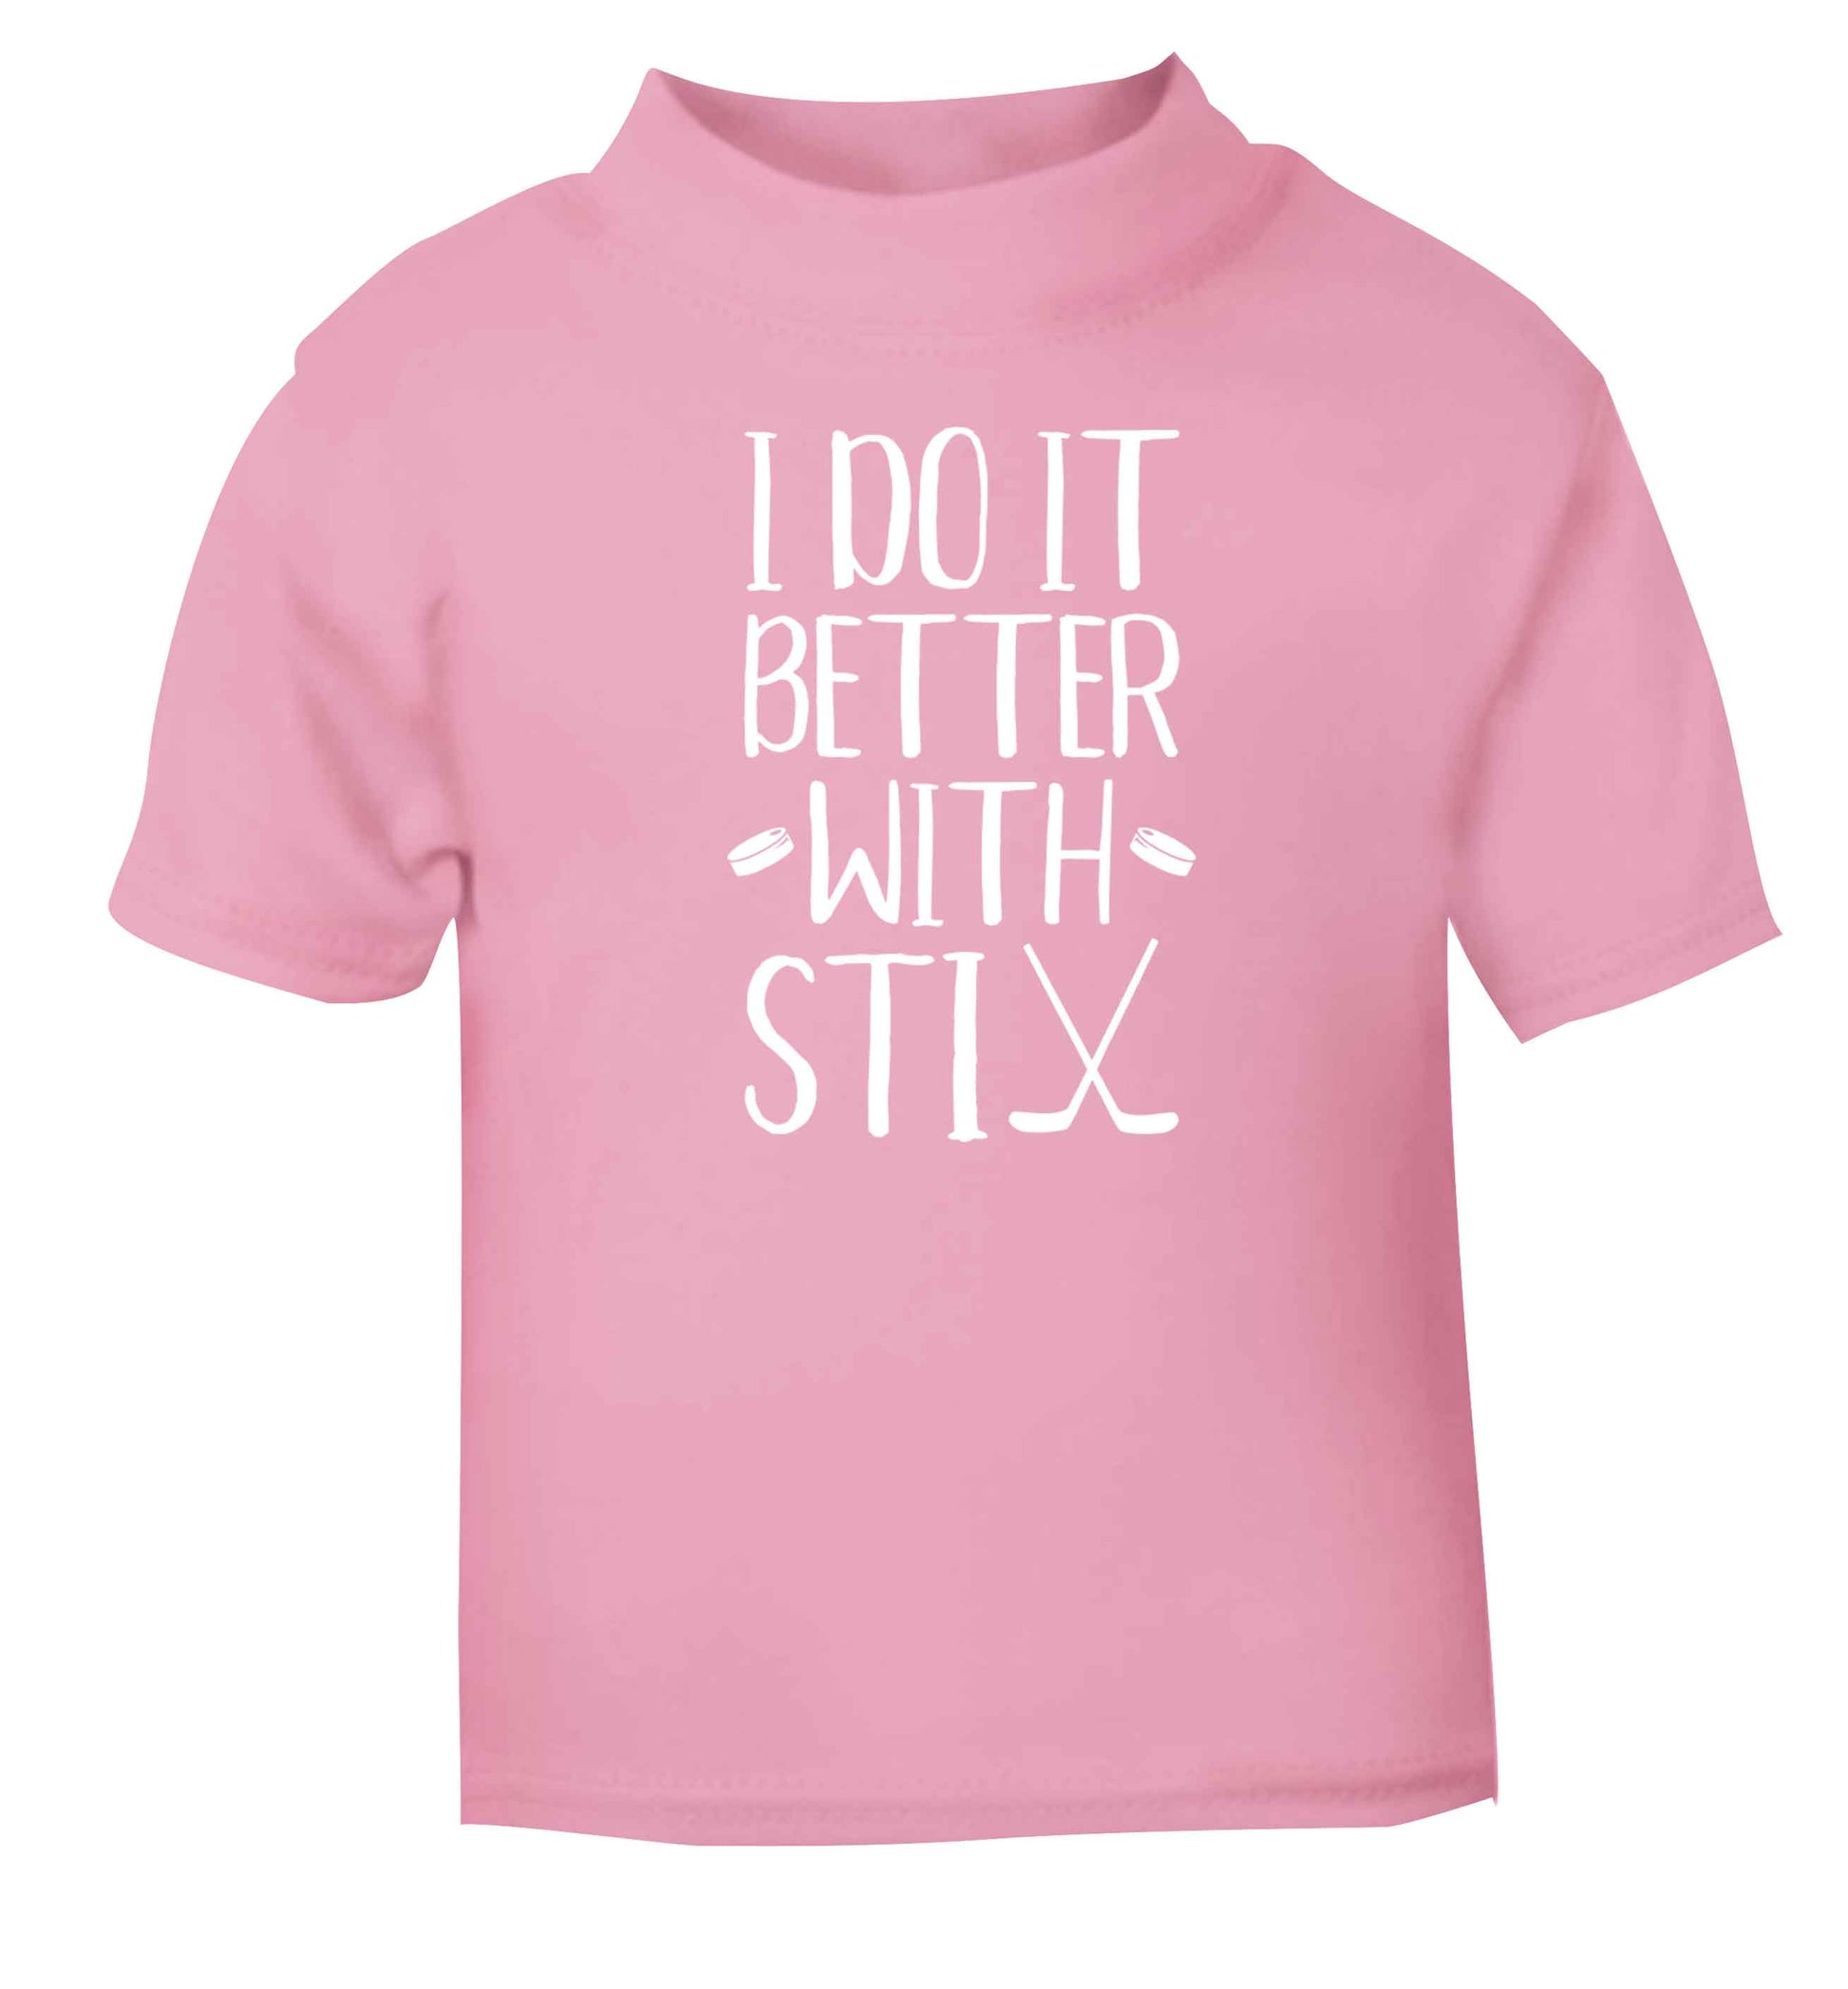 I do it better with stix (hockey) light pink Baby Toddler Tshirt 2 Years